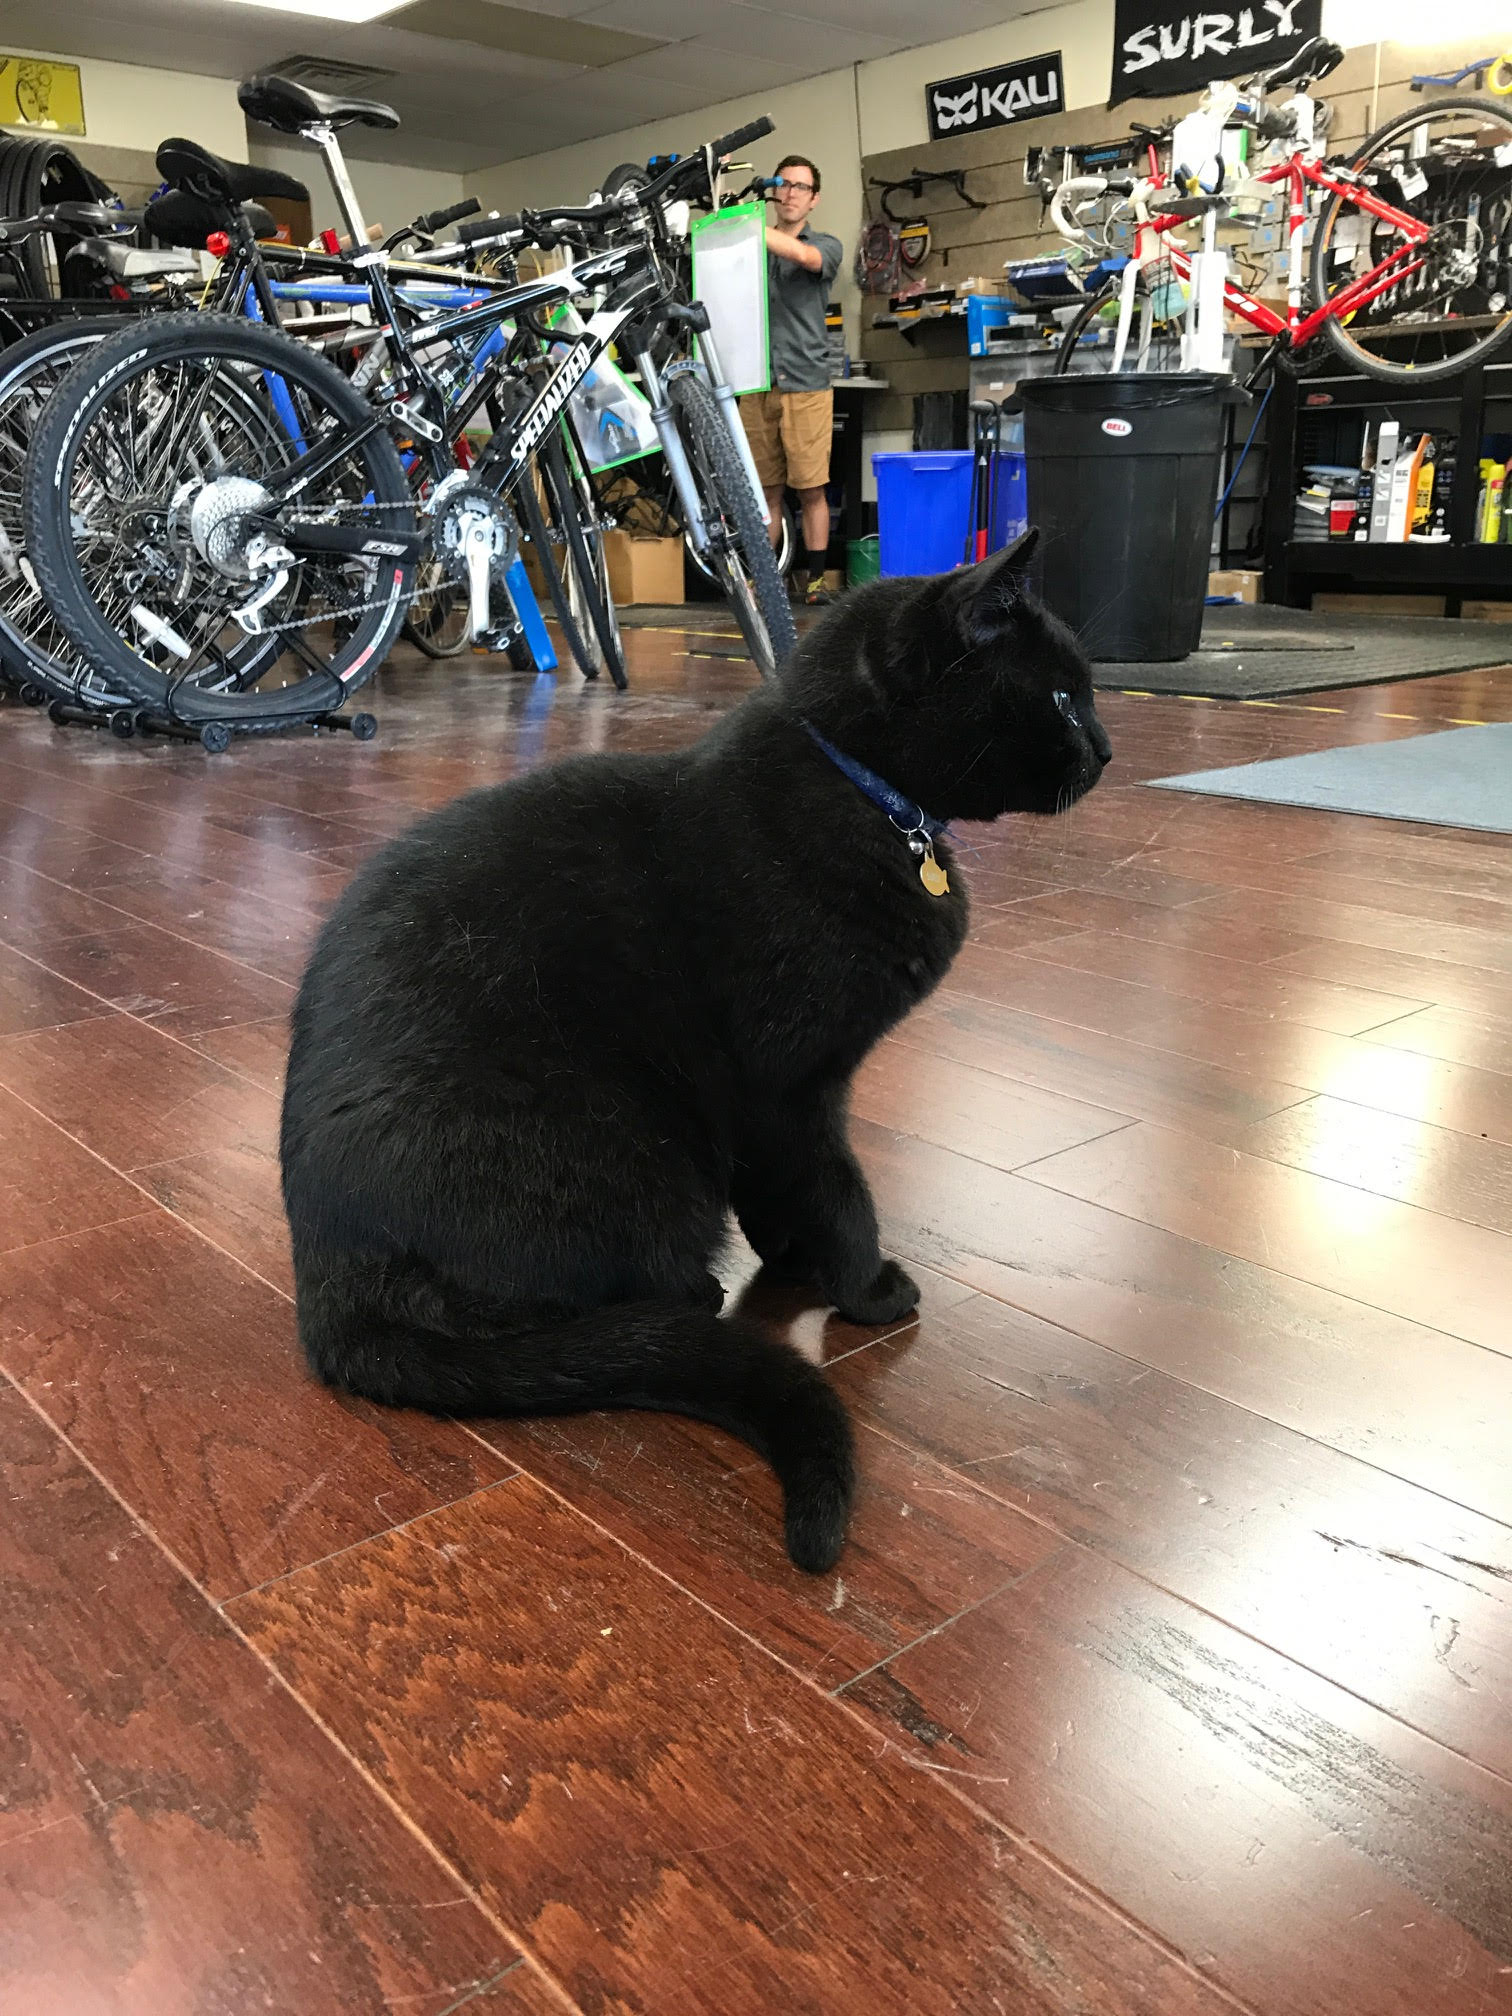 Family Bicycles' shop cat, Surly, was unimpressed with the Dealer Tour. — Photo by Julie Kelly